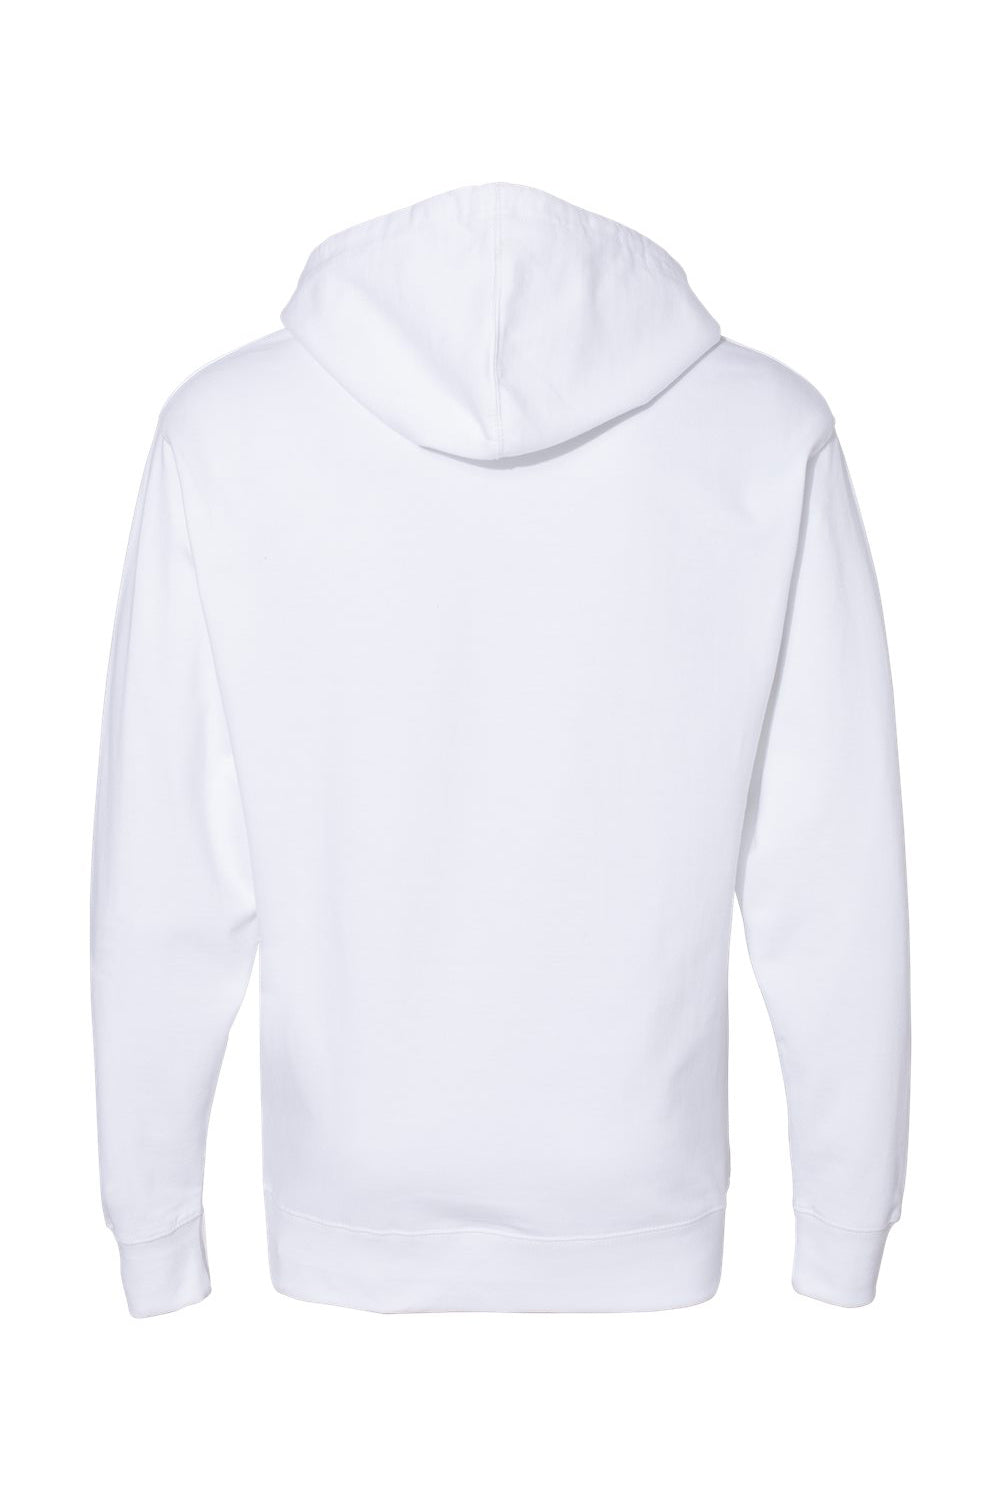 Independent Trading Co. SS4500 Mens Hooded Sweatshirt Hoodie White Flat Back